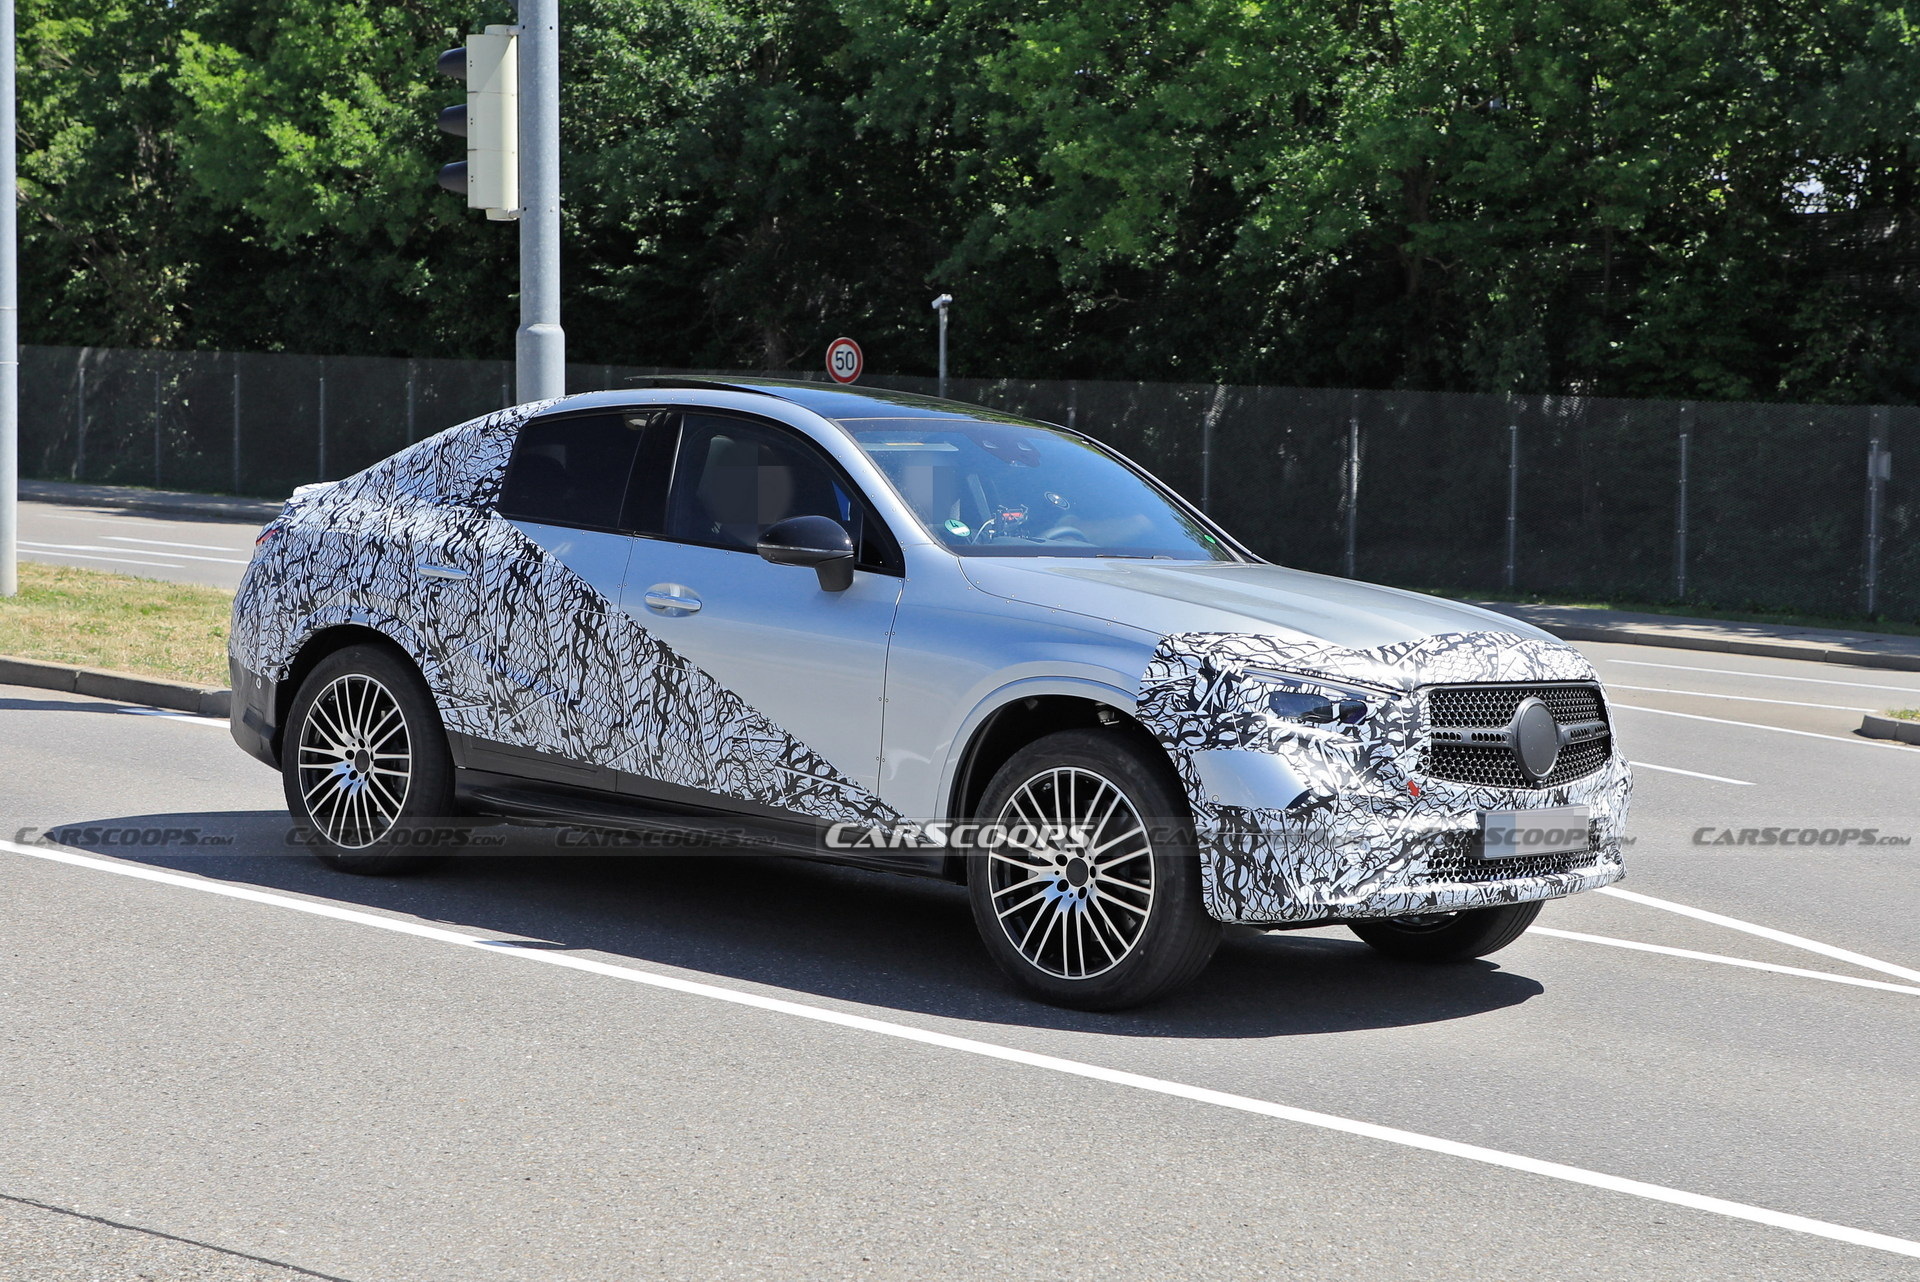 New Mercedes-Benz GLC Coupe Crossover Caught on Cam